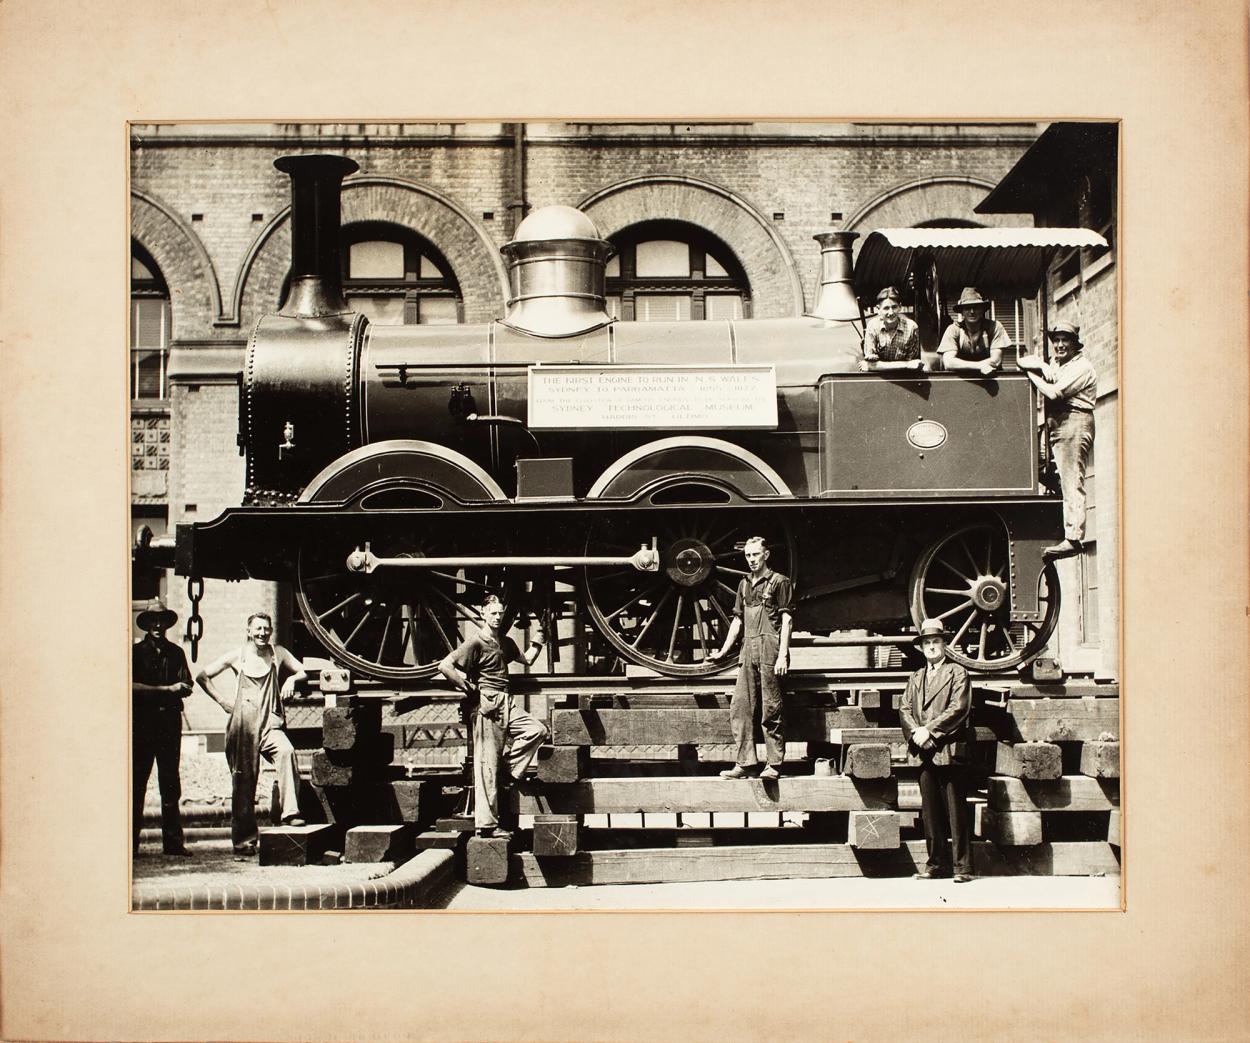 Archival photograph of a men moving a large steam train